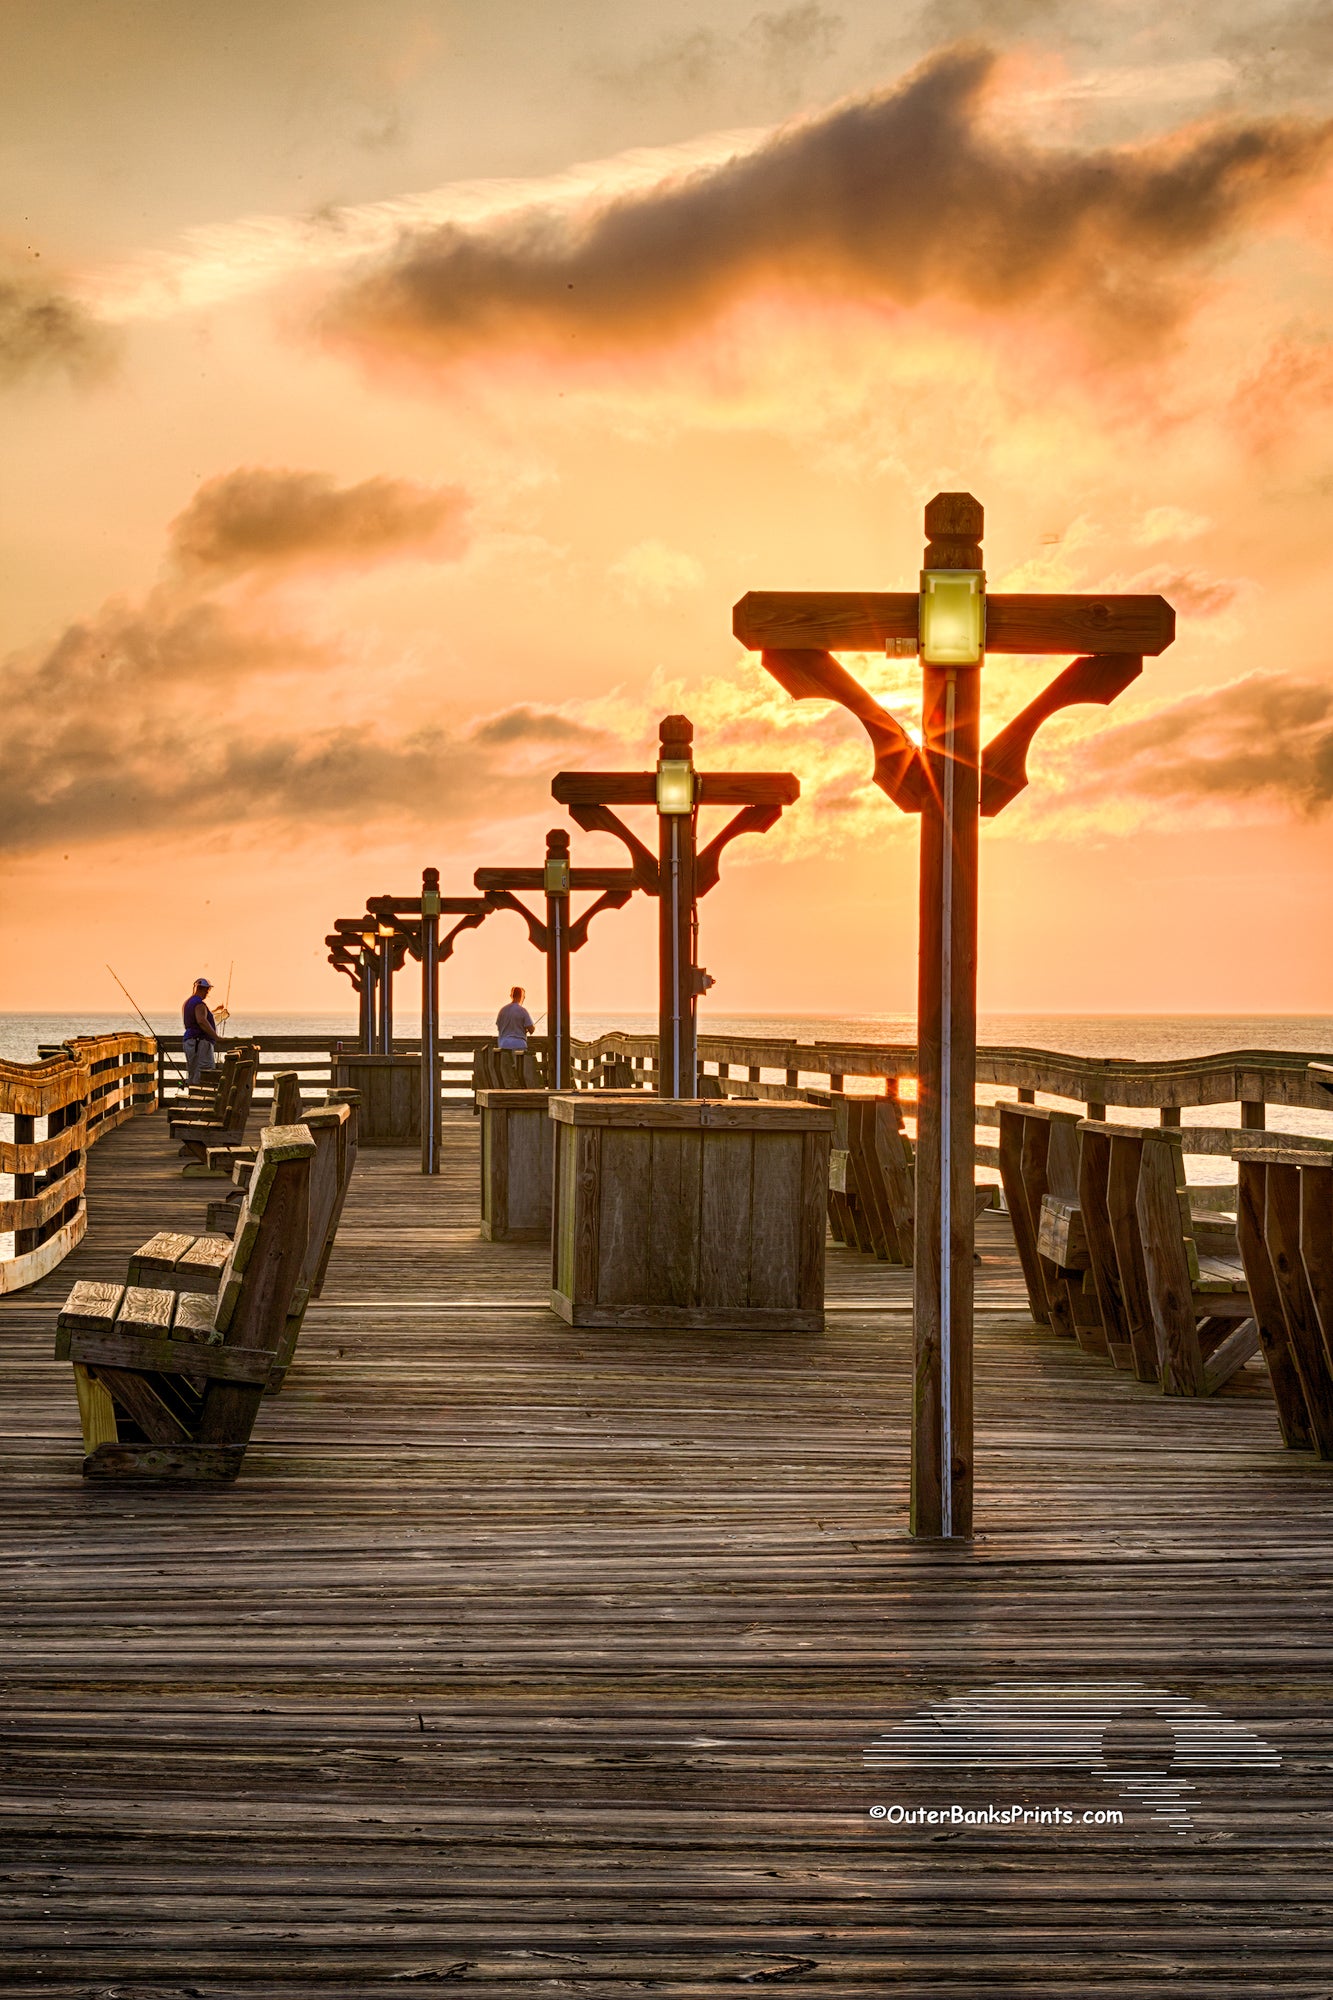 Sunrise on Kitty Hawk Fishing Pier on the Outer banks.